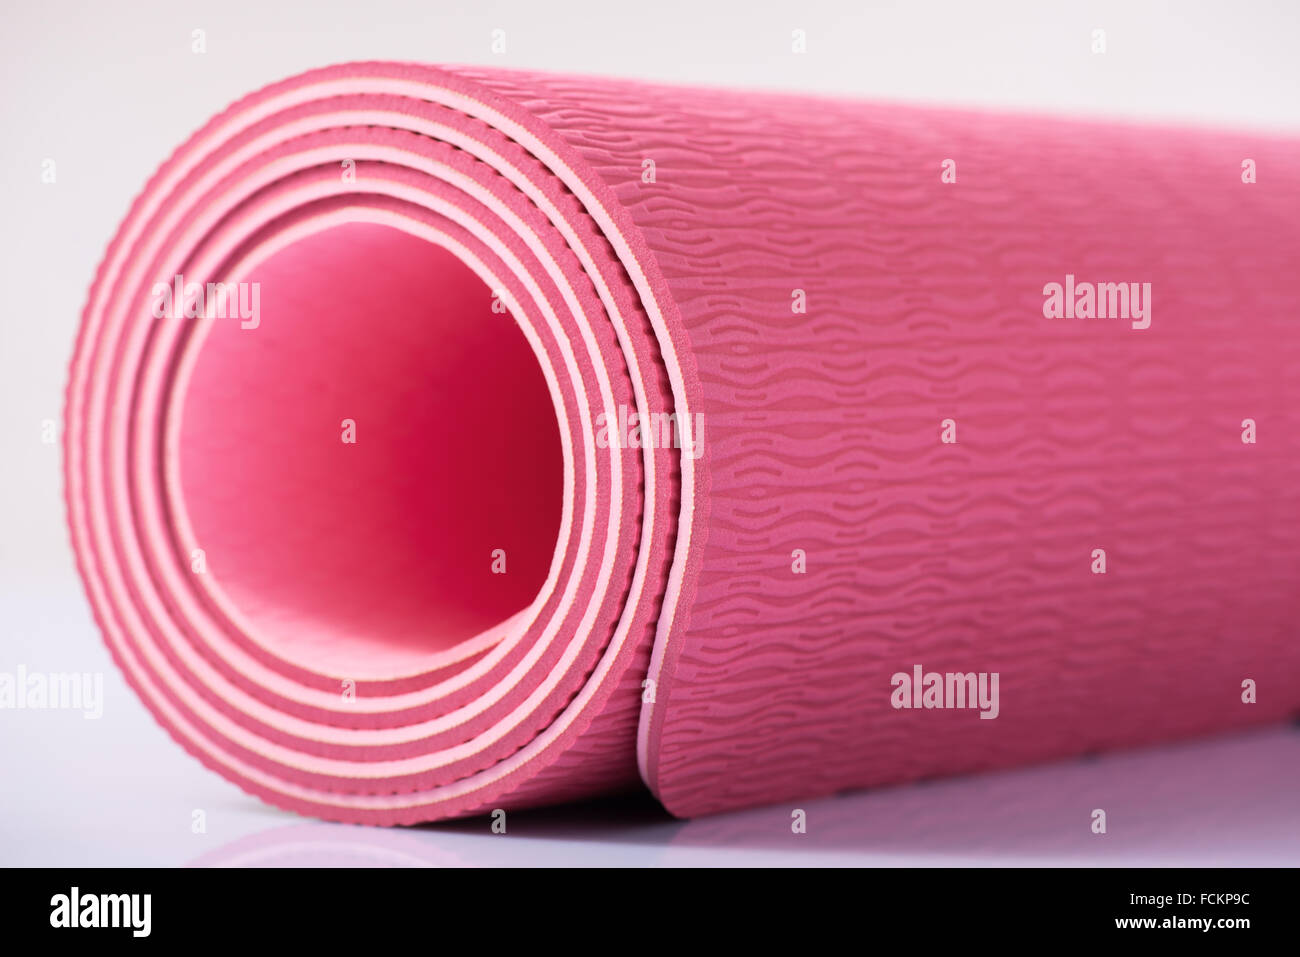 Yoga mat is on the surface. Stock Photo